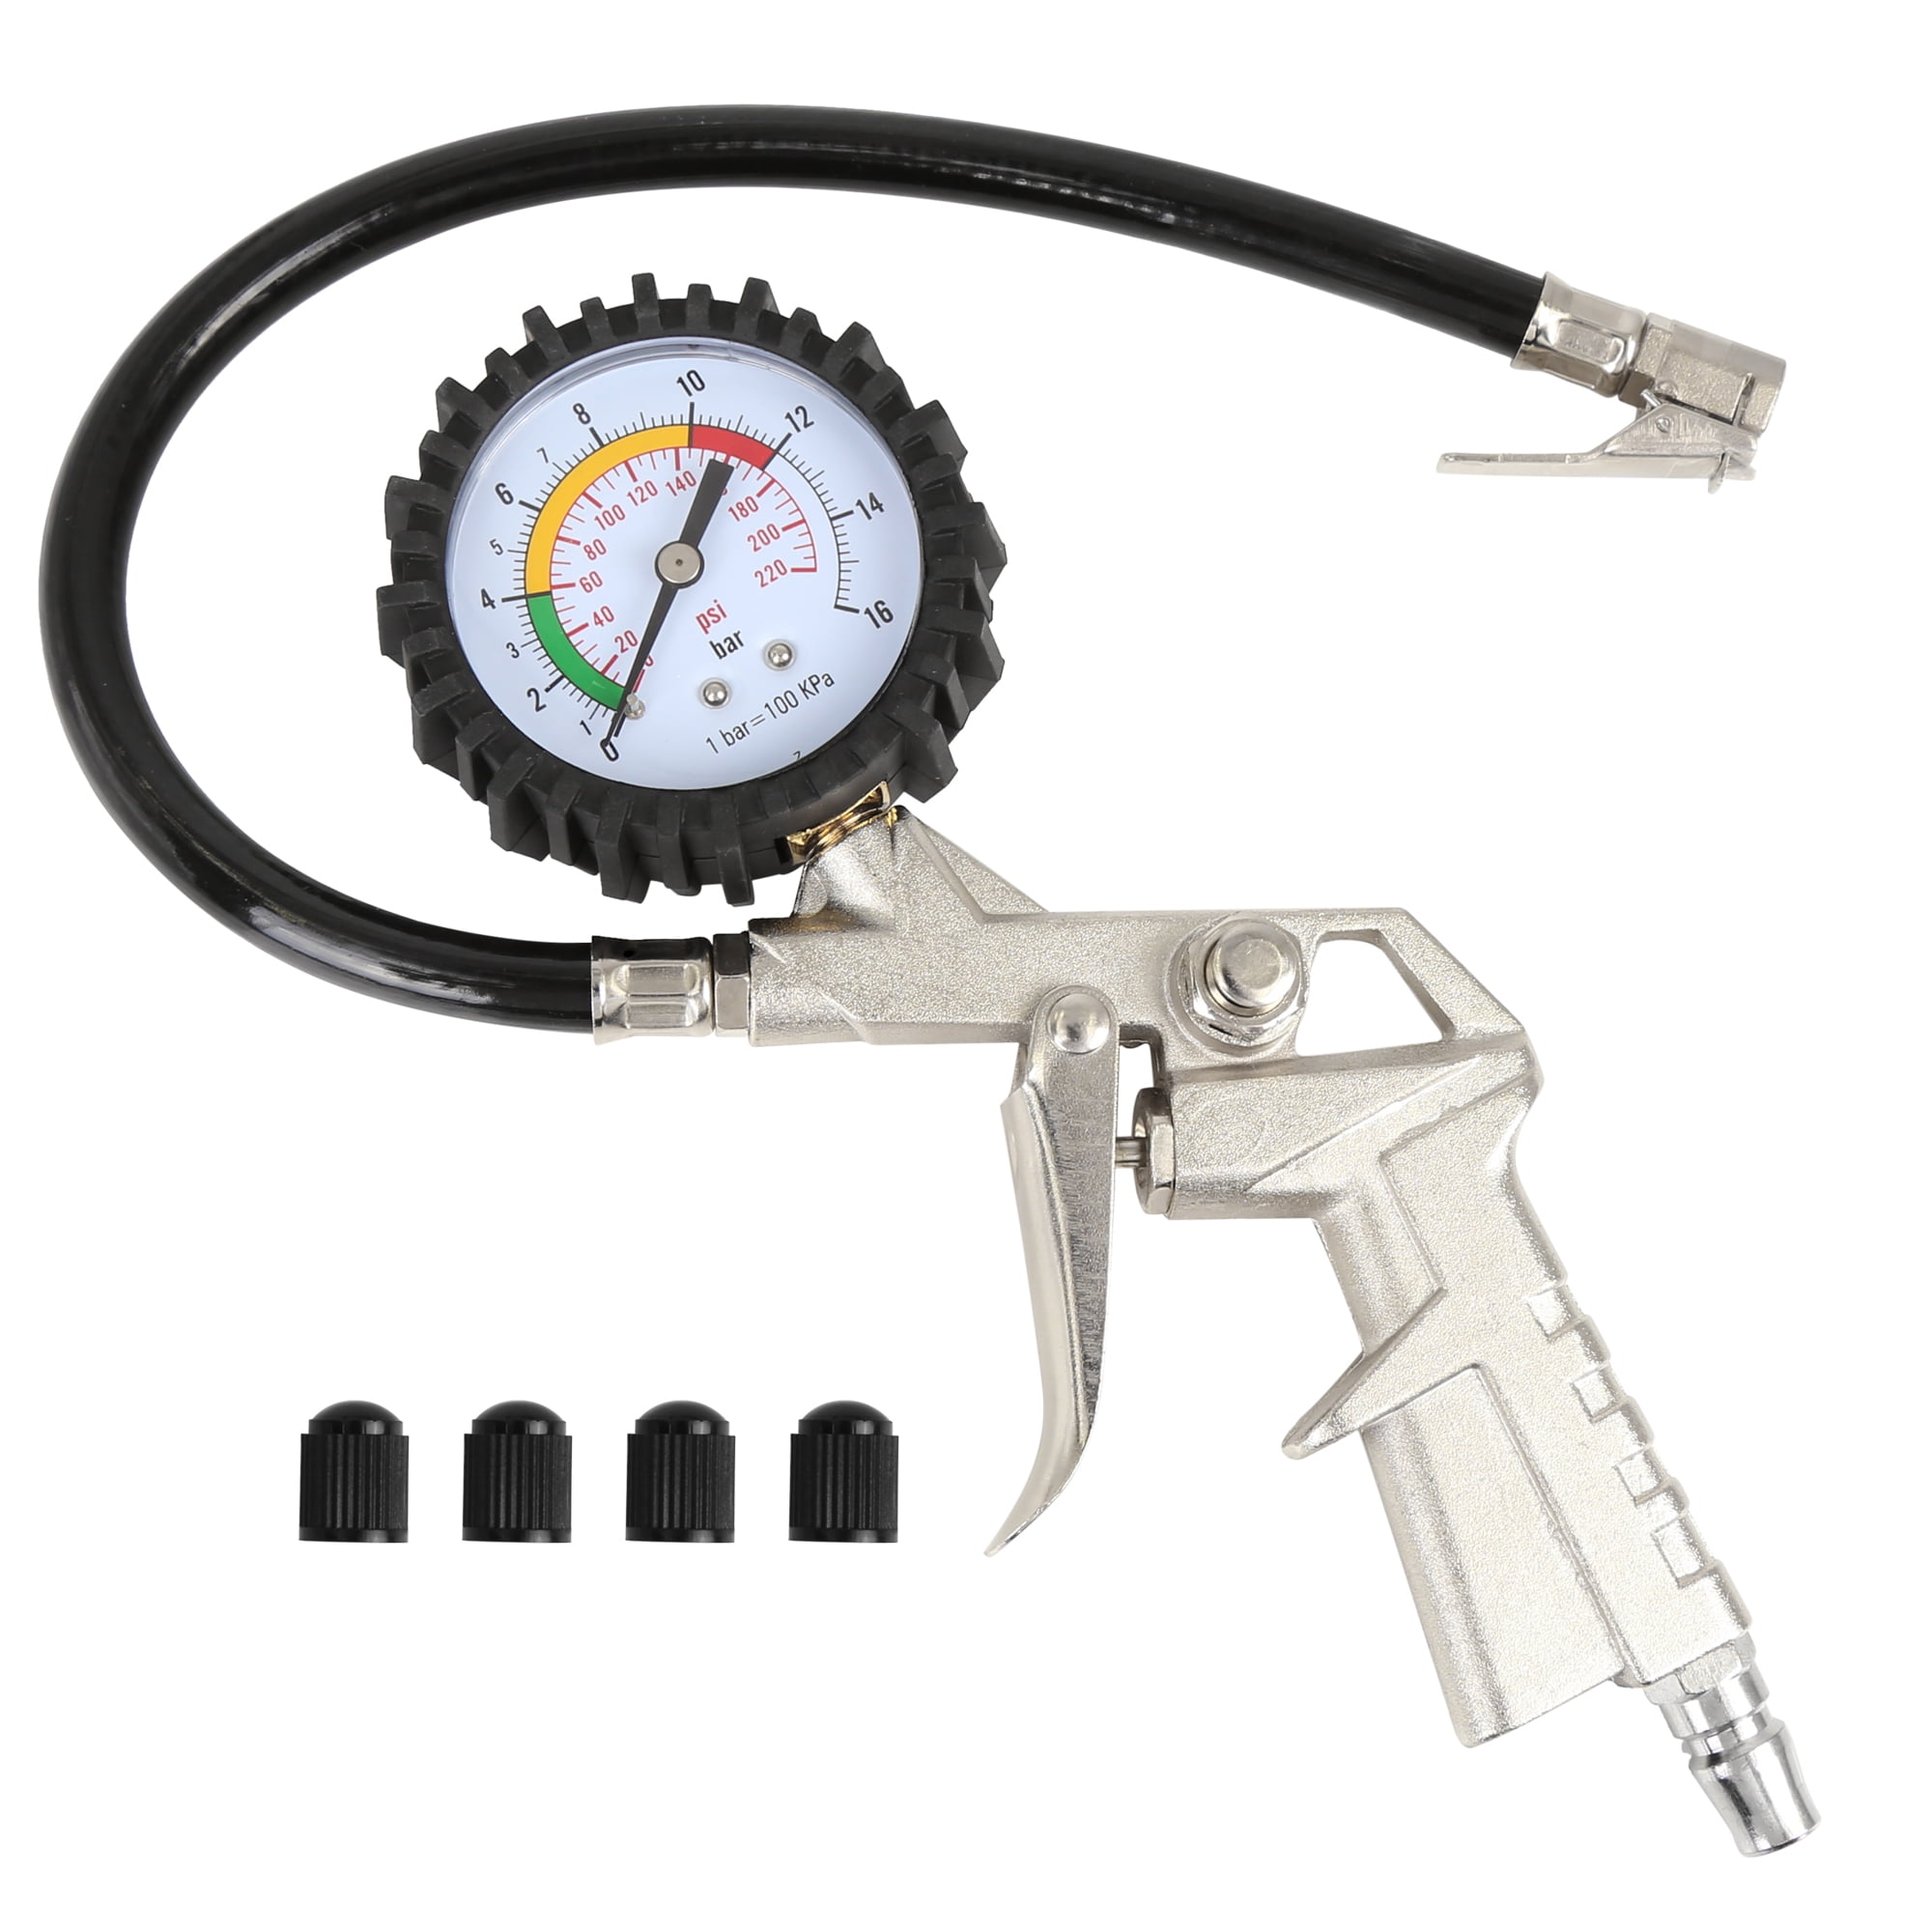 Tire Inflation Gauge Tire Inflator Tire Pressure Gauge Tire Pressure Gauge Air Pressure Gauge High Precision 220 PSI for Car Motorcycle Passenger Car Truck Tire Inflation Gauge